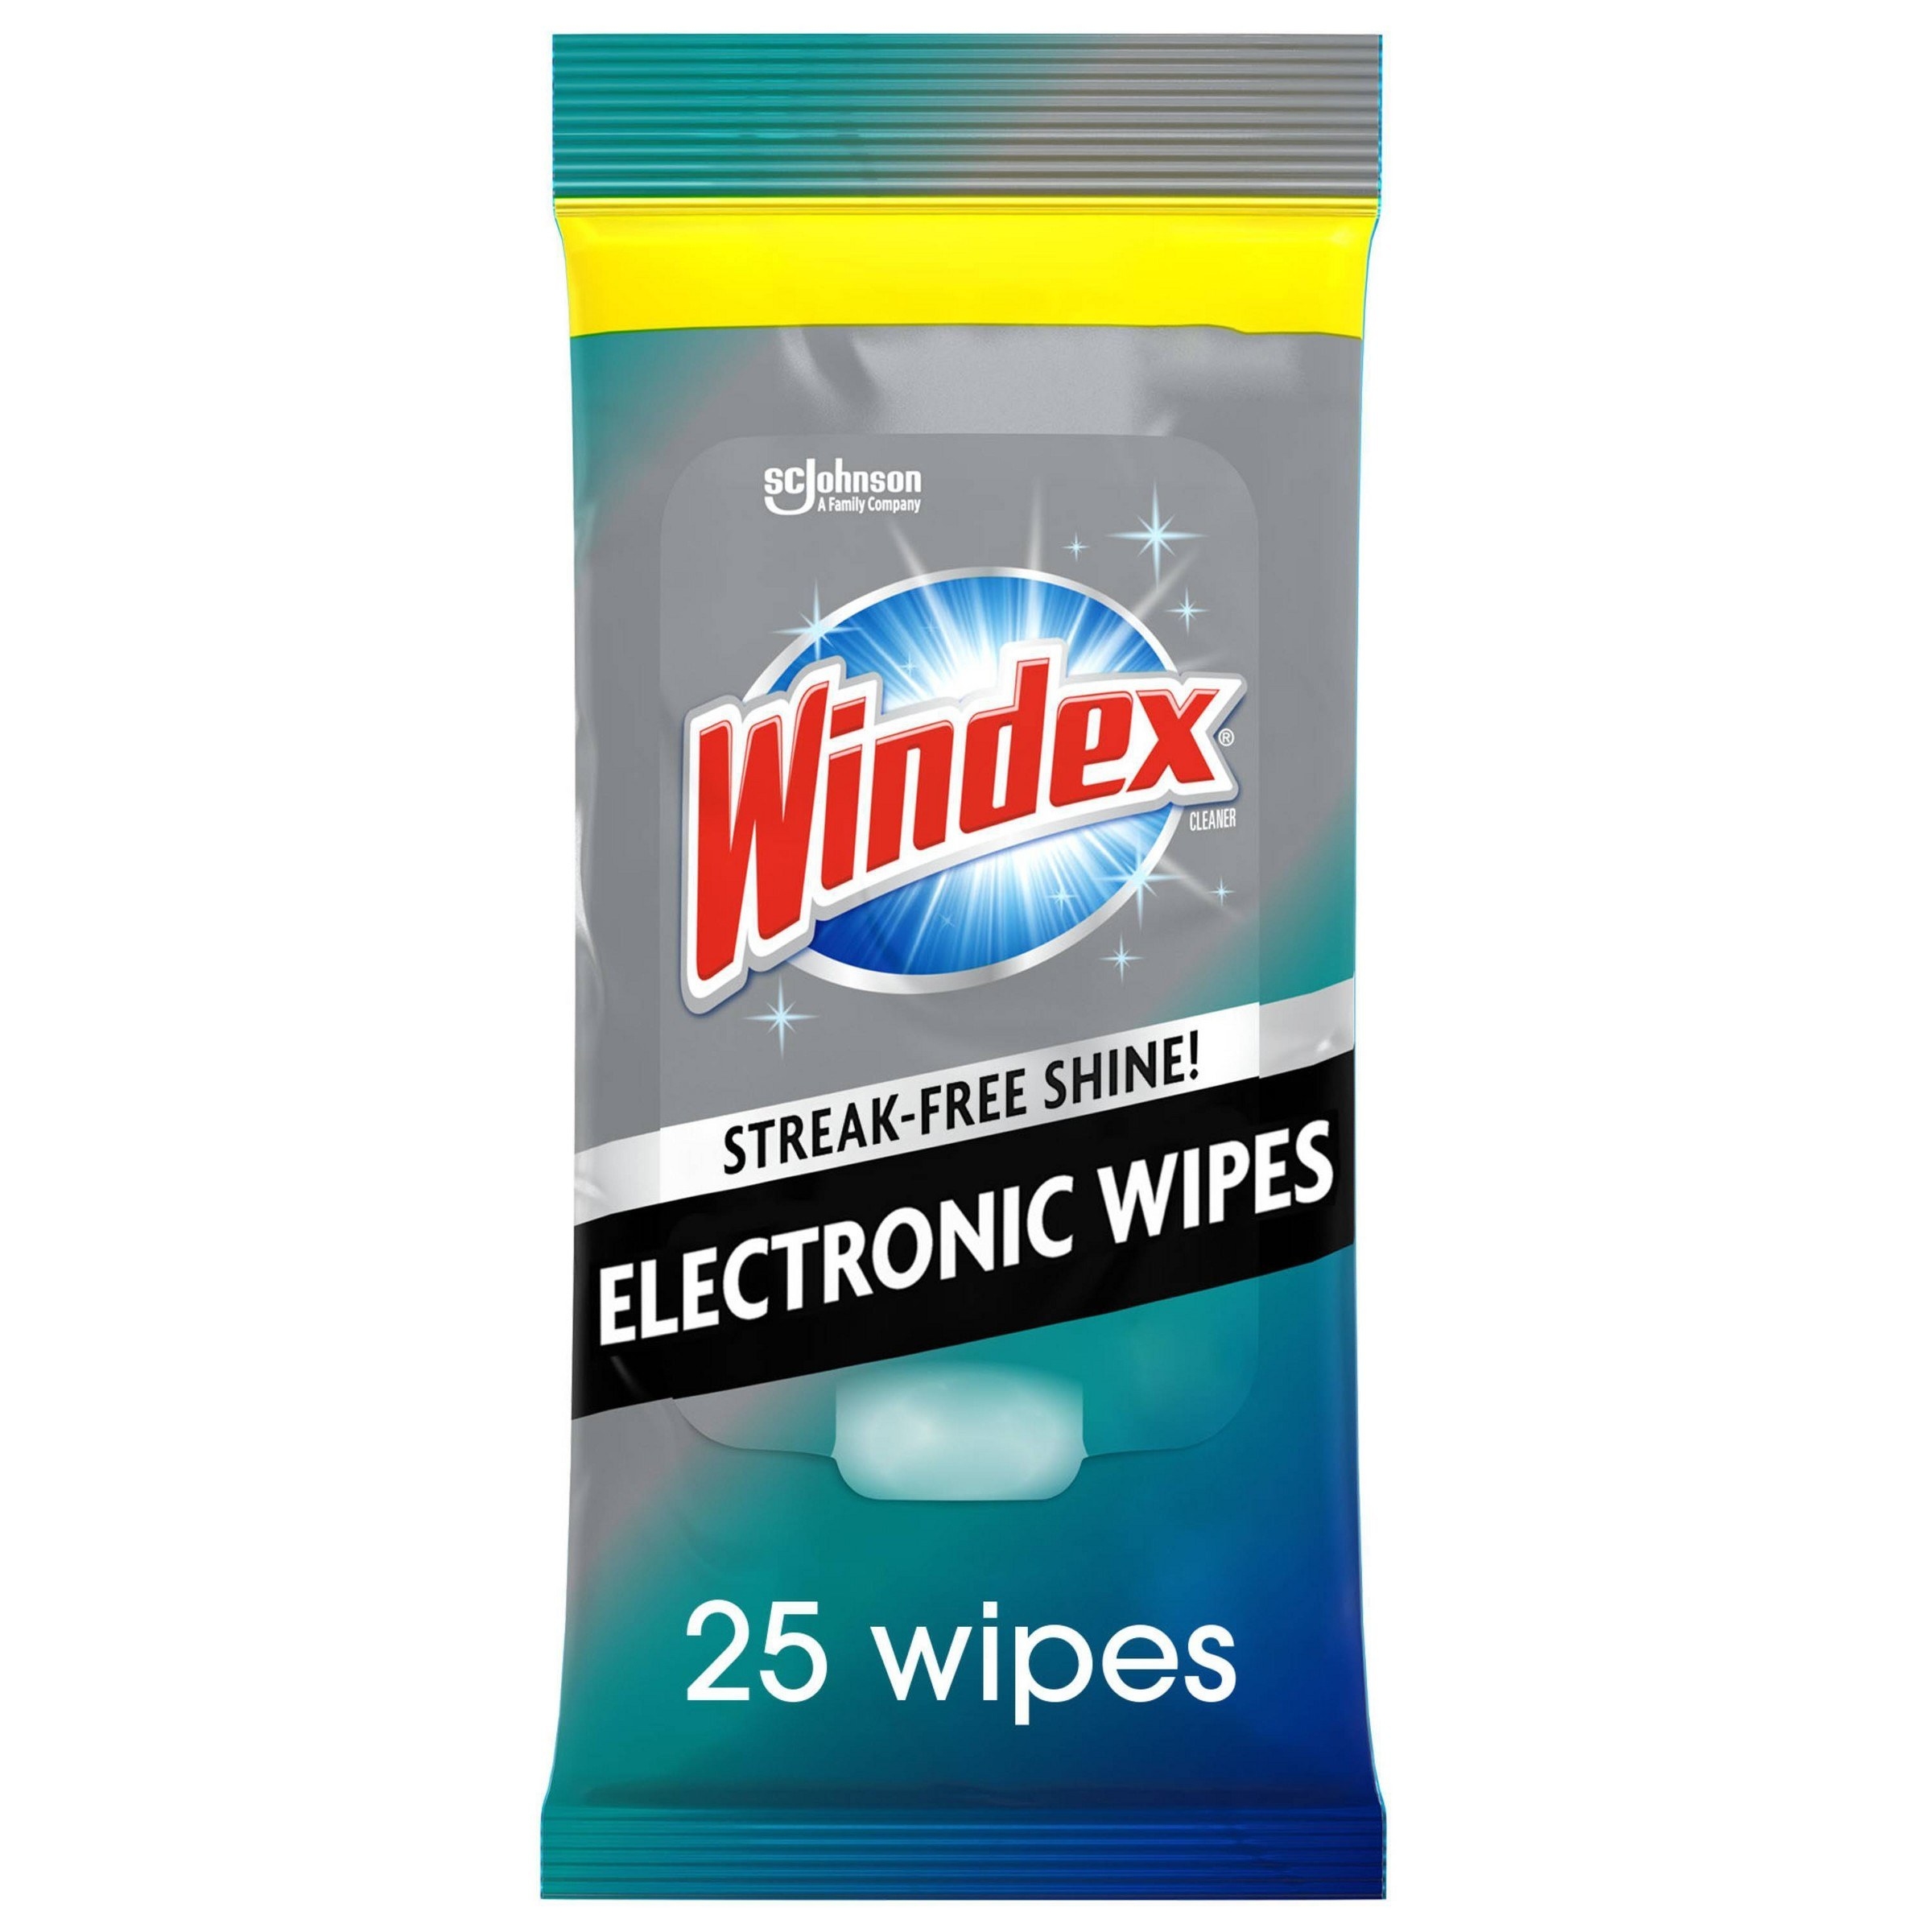 the wipes